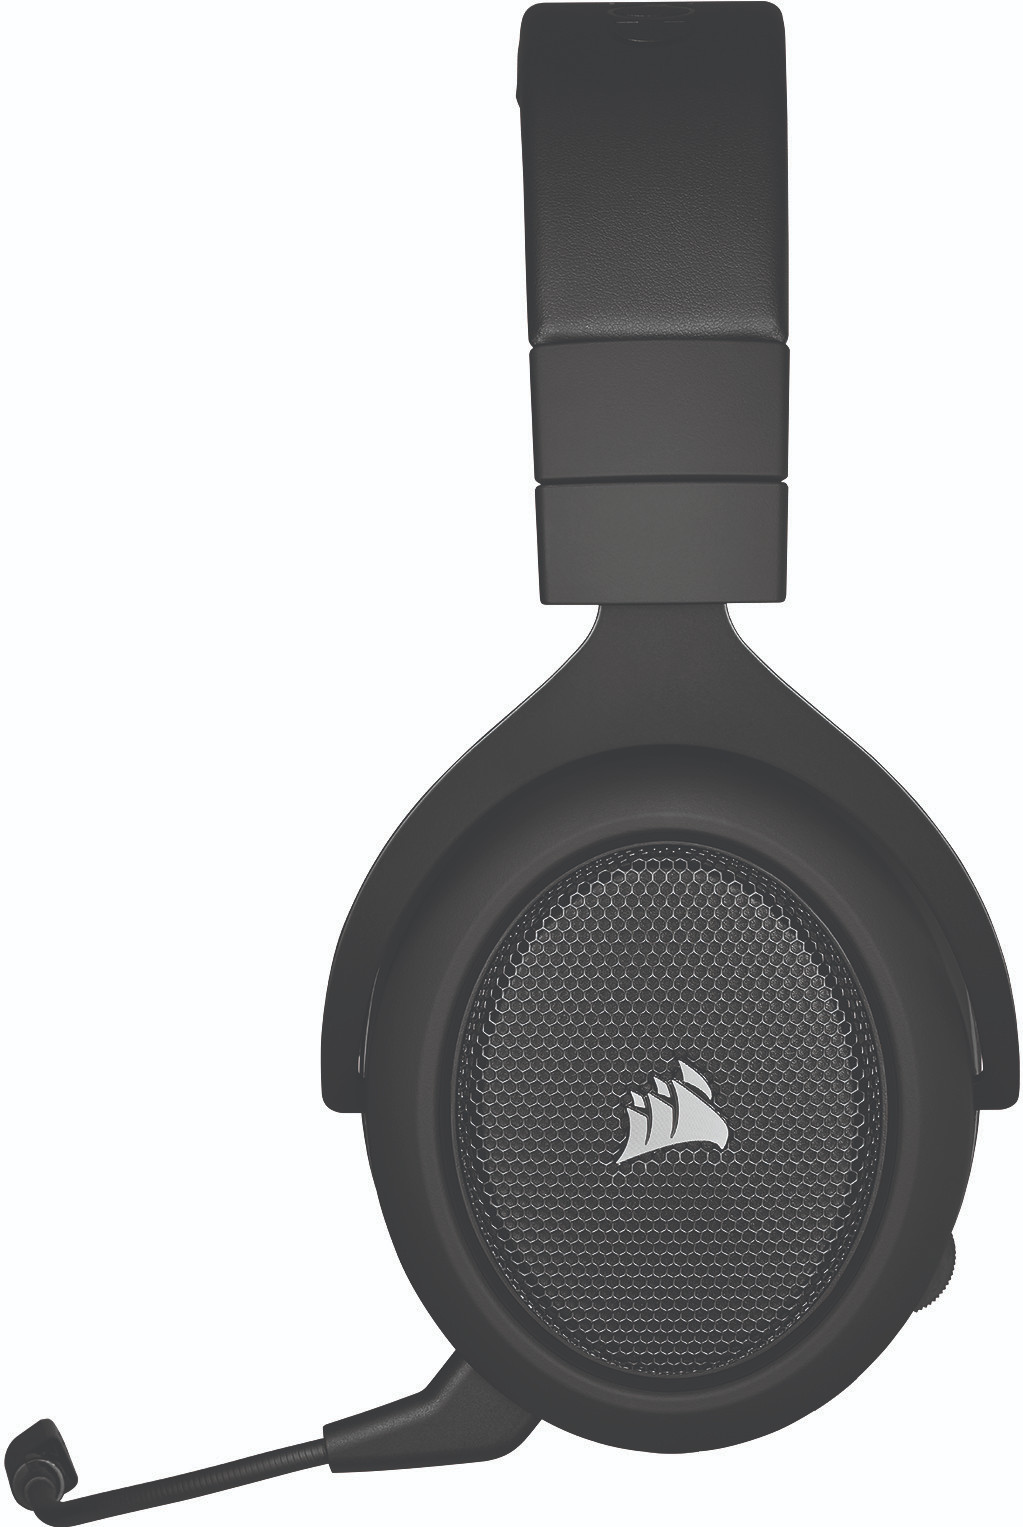 CORSAIR - HS70 PRO Wireless Stereo Gaming Headset - Carbon